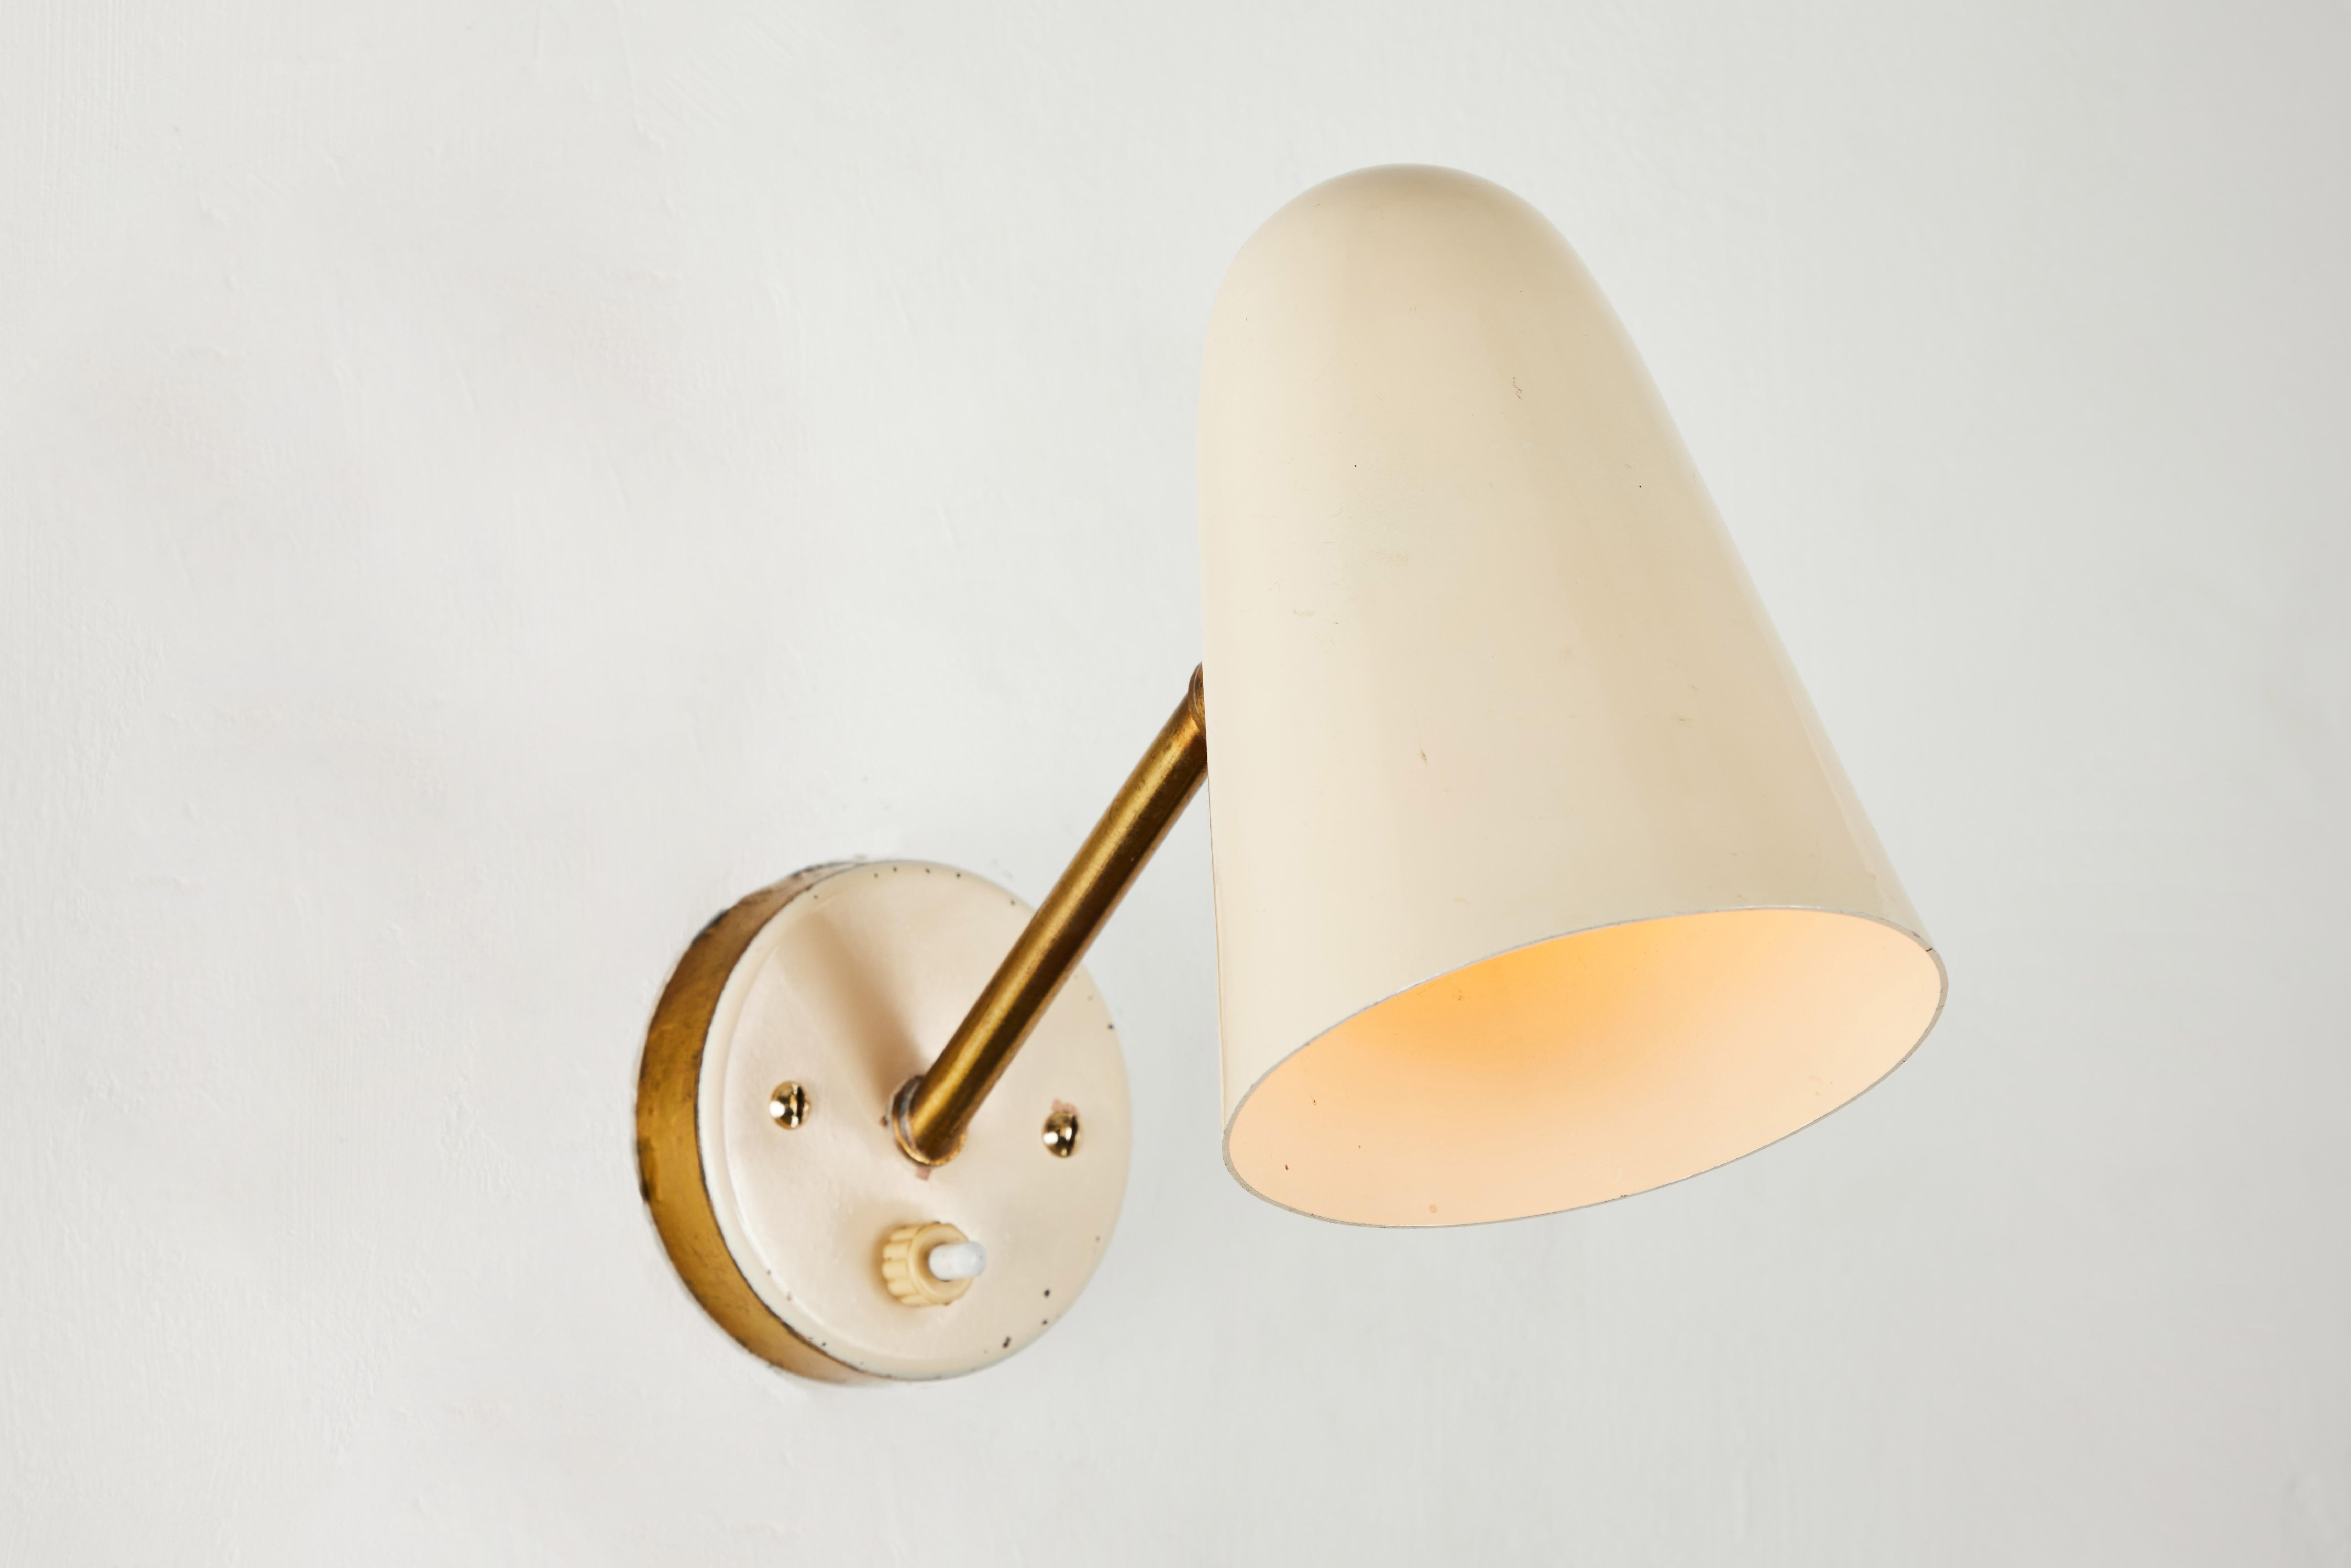 Pair of 1950s Italian sconces attributed to Gino Sarfatti. Executed in brass and original lacquered white aluminum. Sconces pivot 360 degrees up/down and left/right on a ball joint. Original on/off push switch in backplate. Accommodates a single US